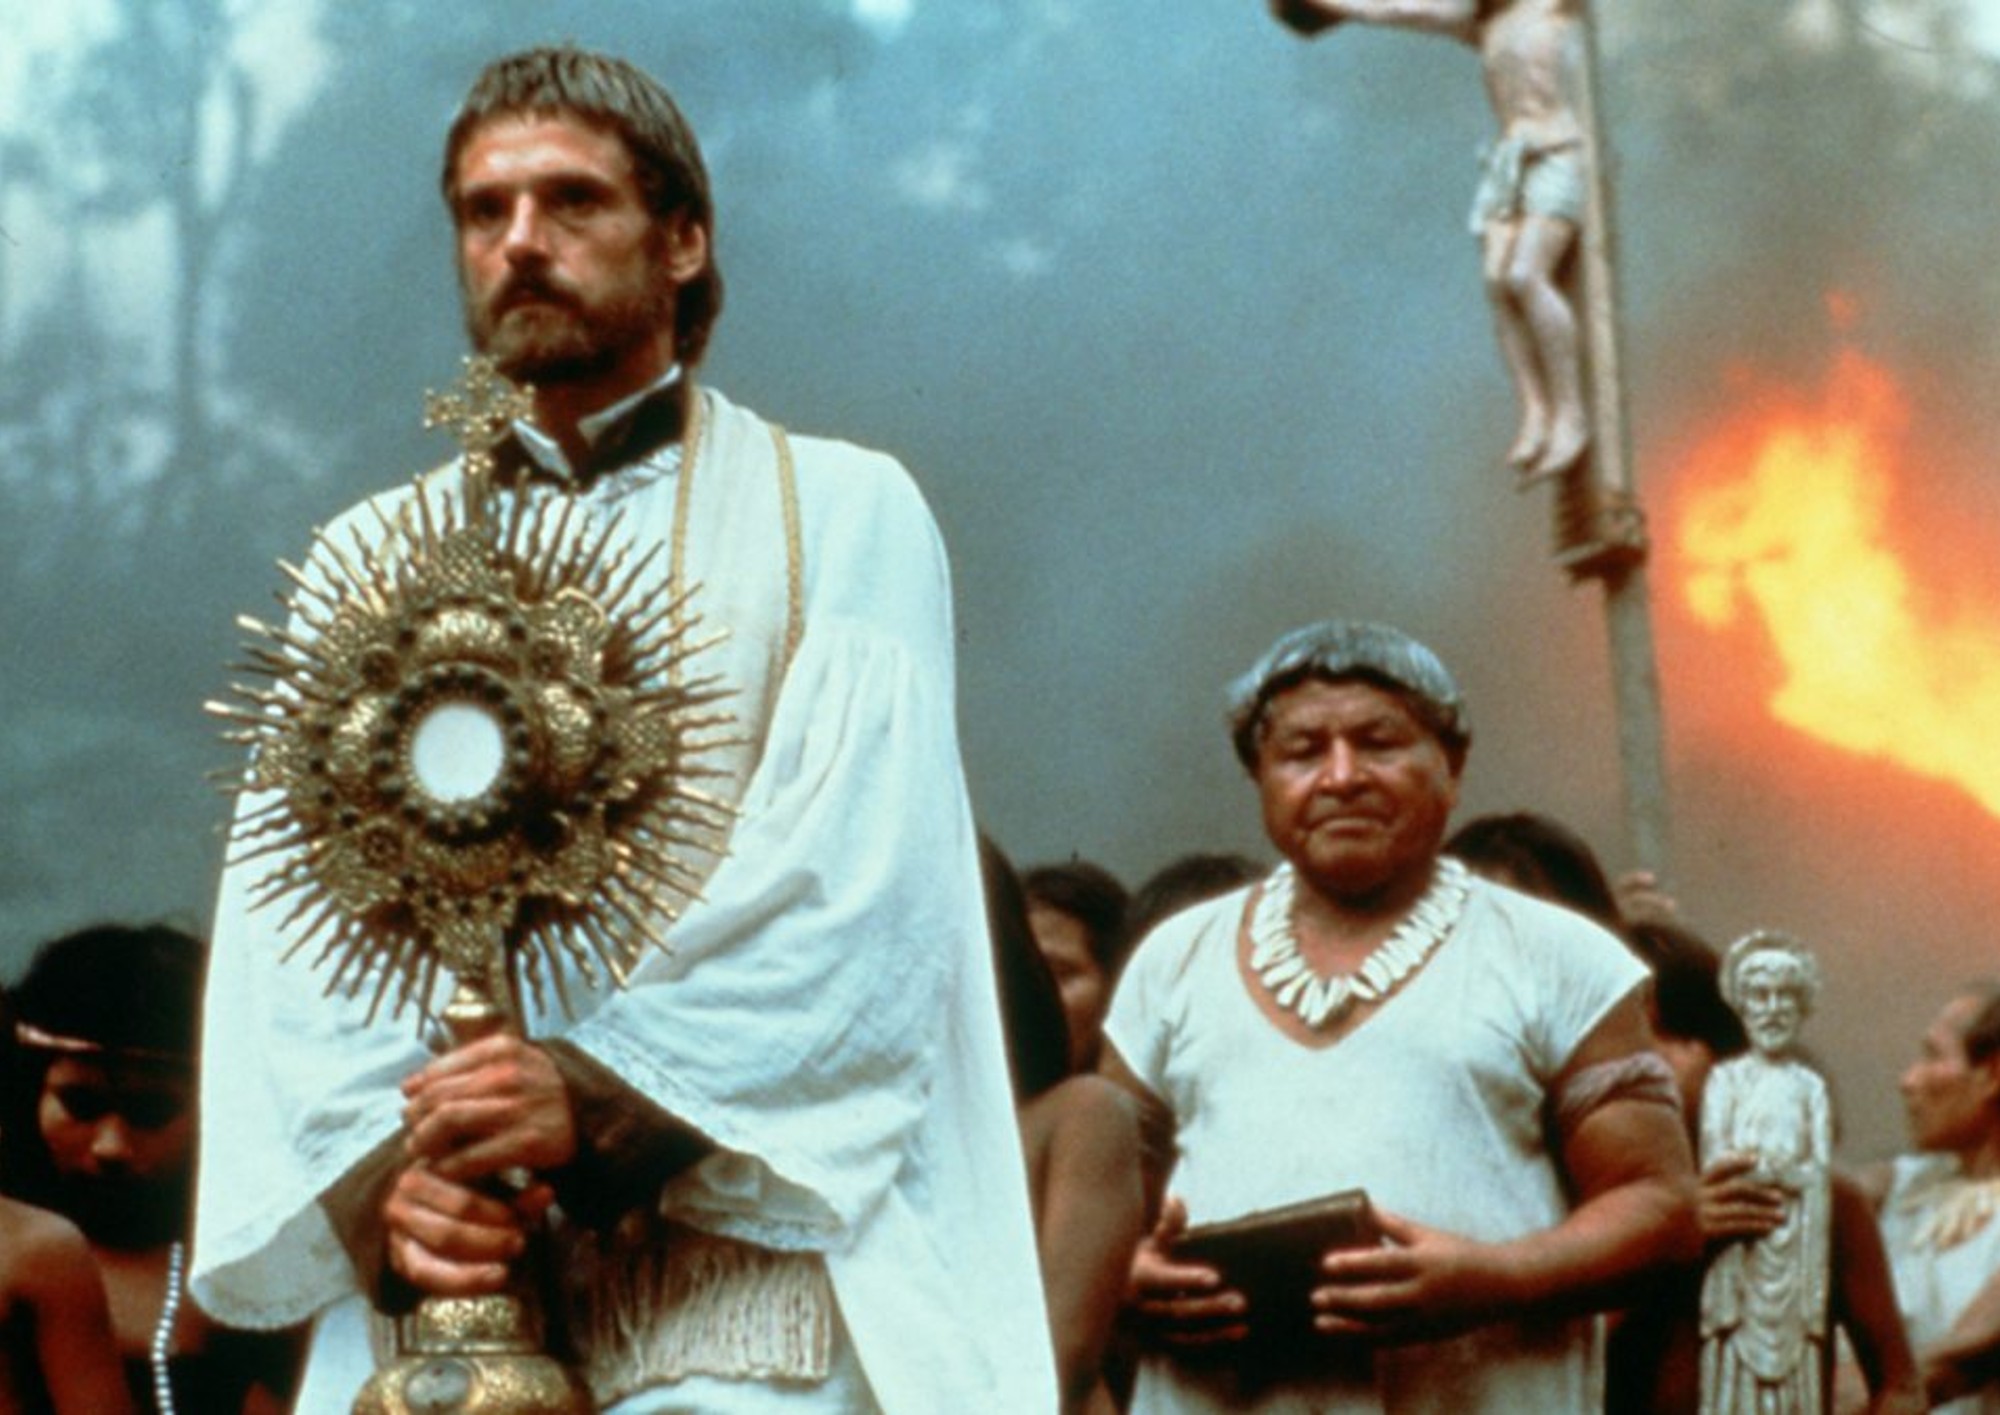 Image from the 1986 motion picture The Mission